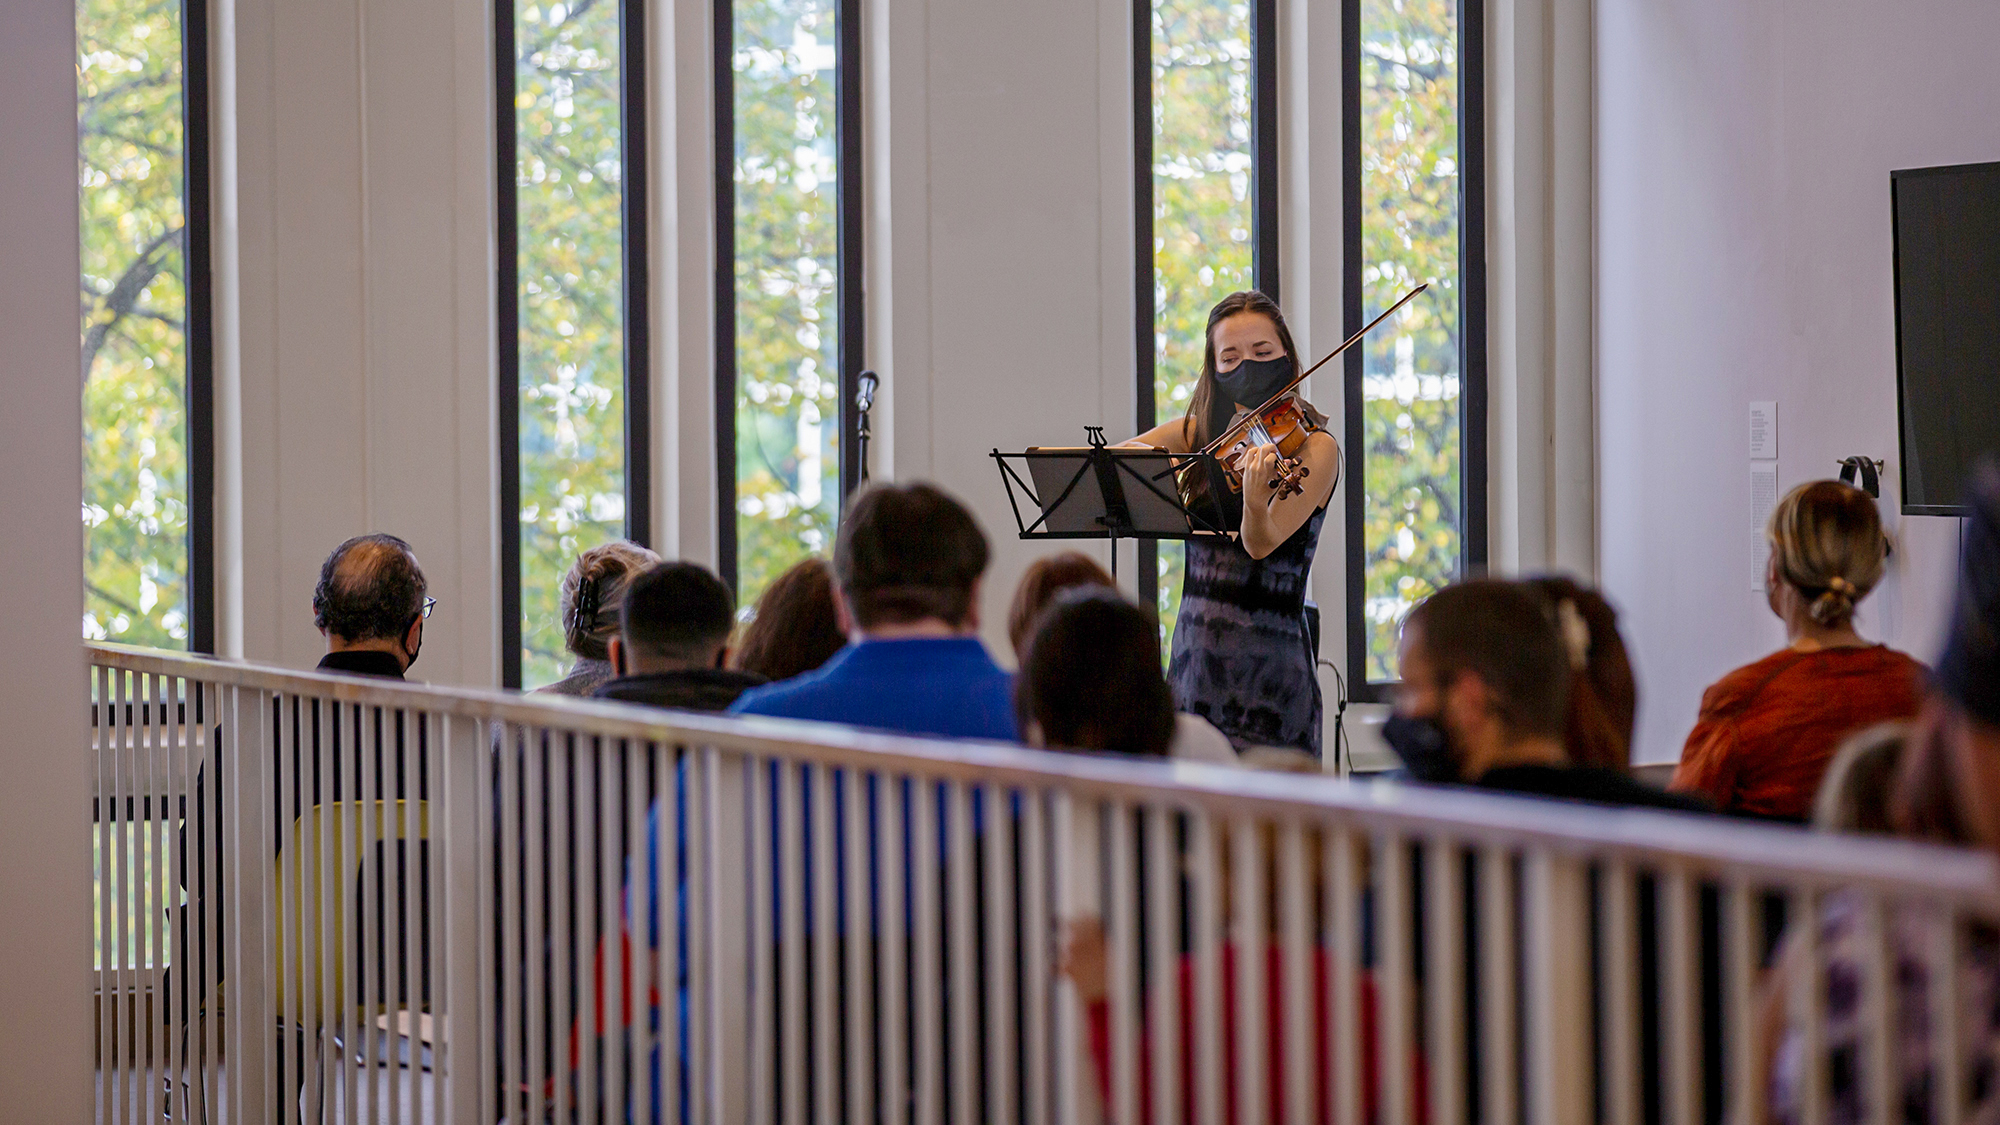 Violinist Emily Daggett Smith performing in the University Art Museum